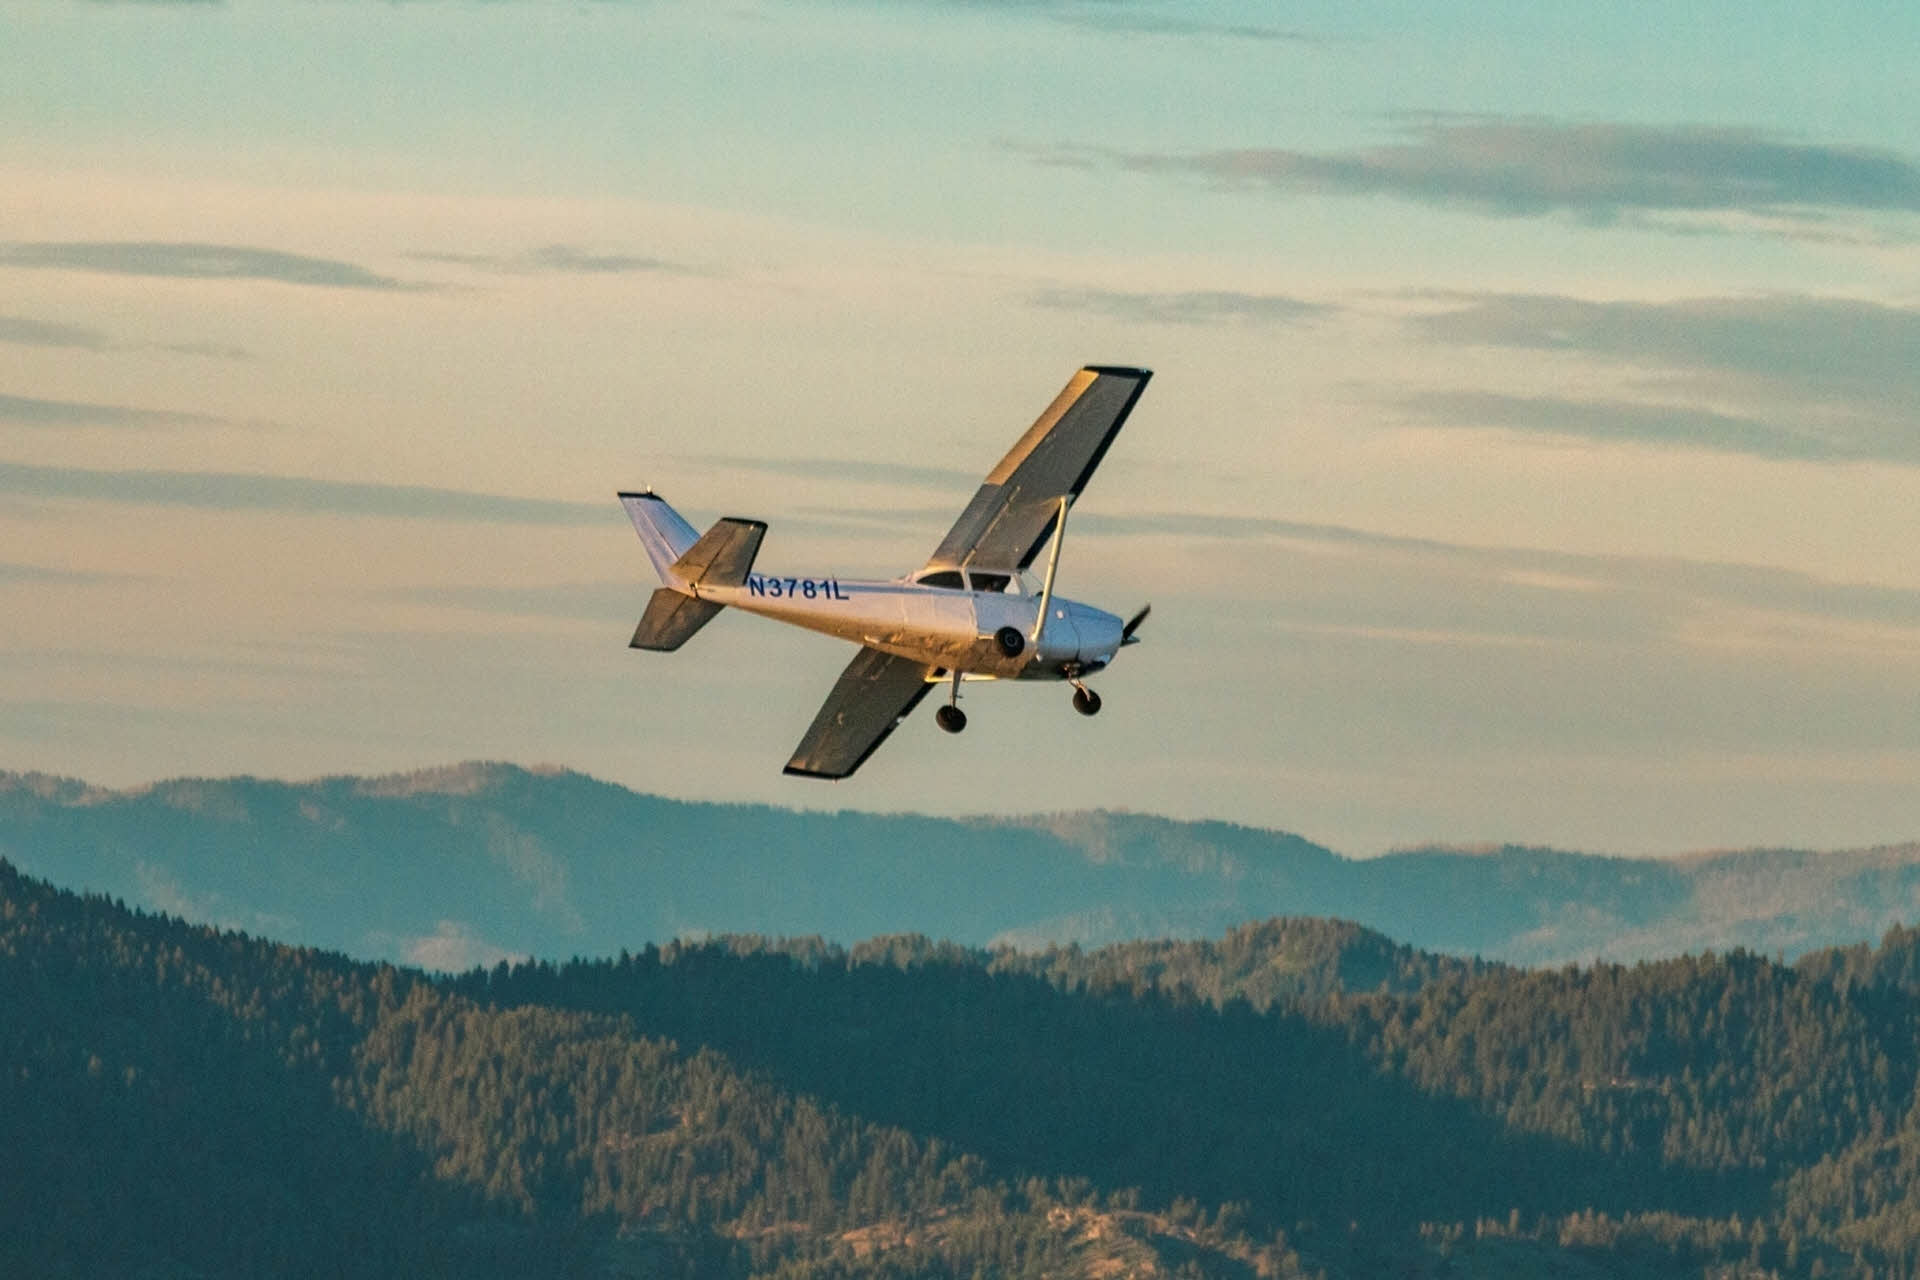 Carmel Aviation offers a commercial pilot license course at our flight school in Boise.